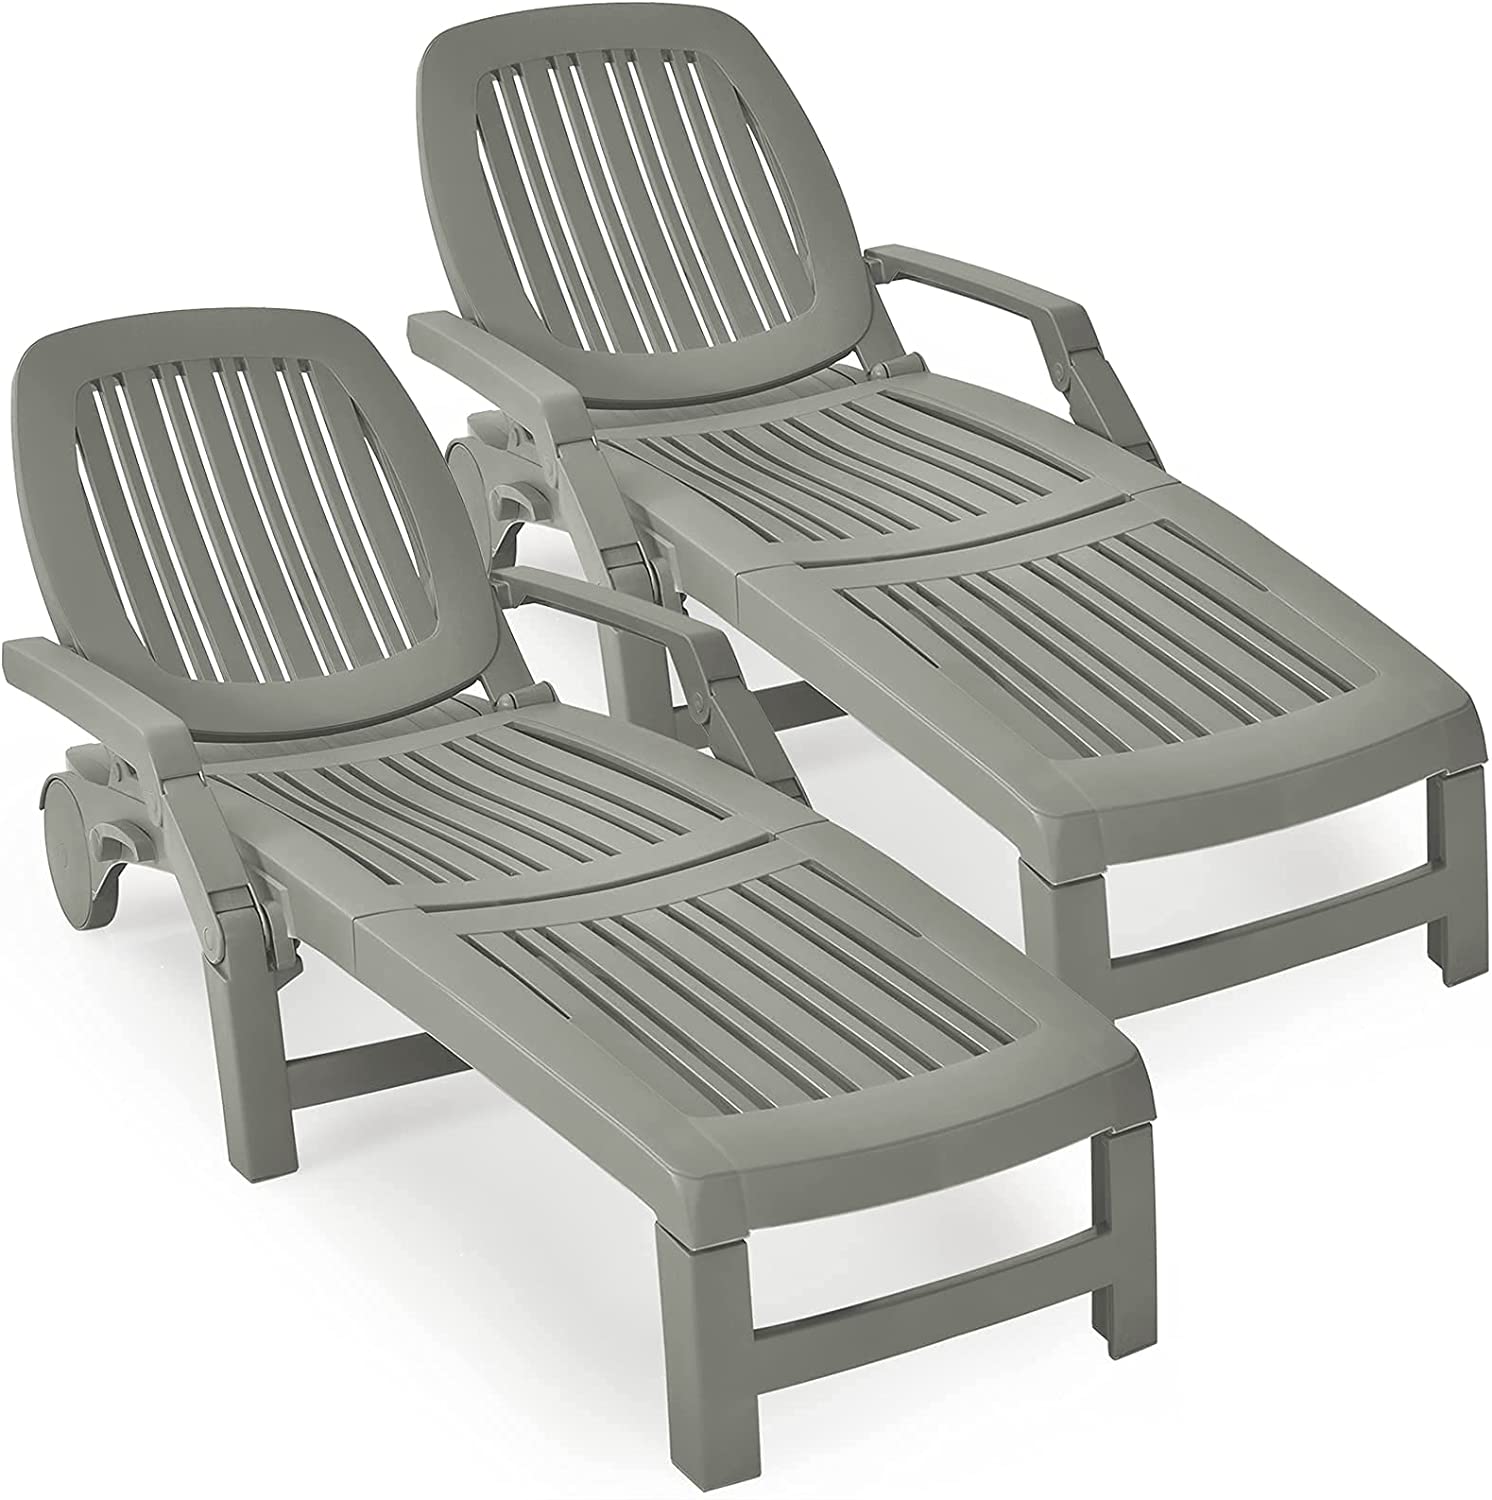 Chaise Lounge Outdoor,Foldable Sun Lounger with Wheels